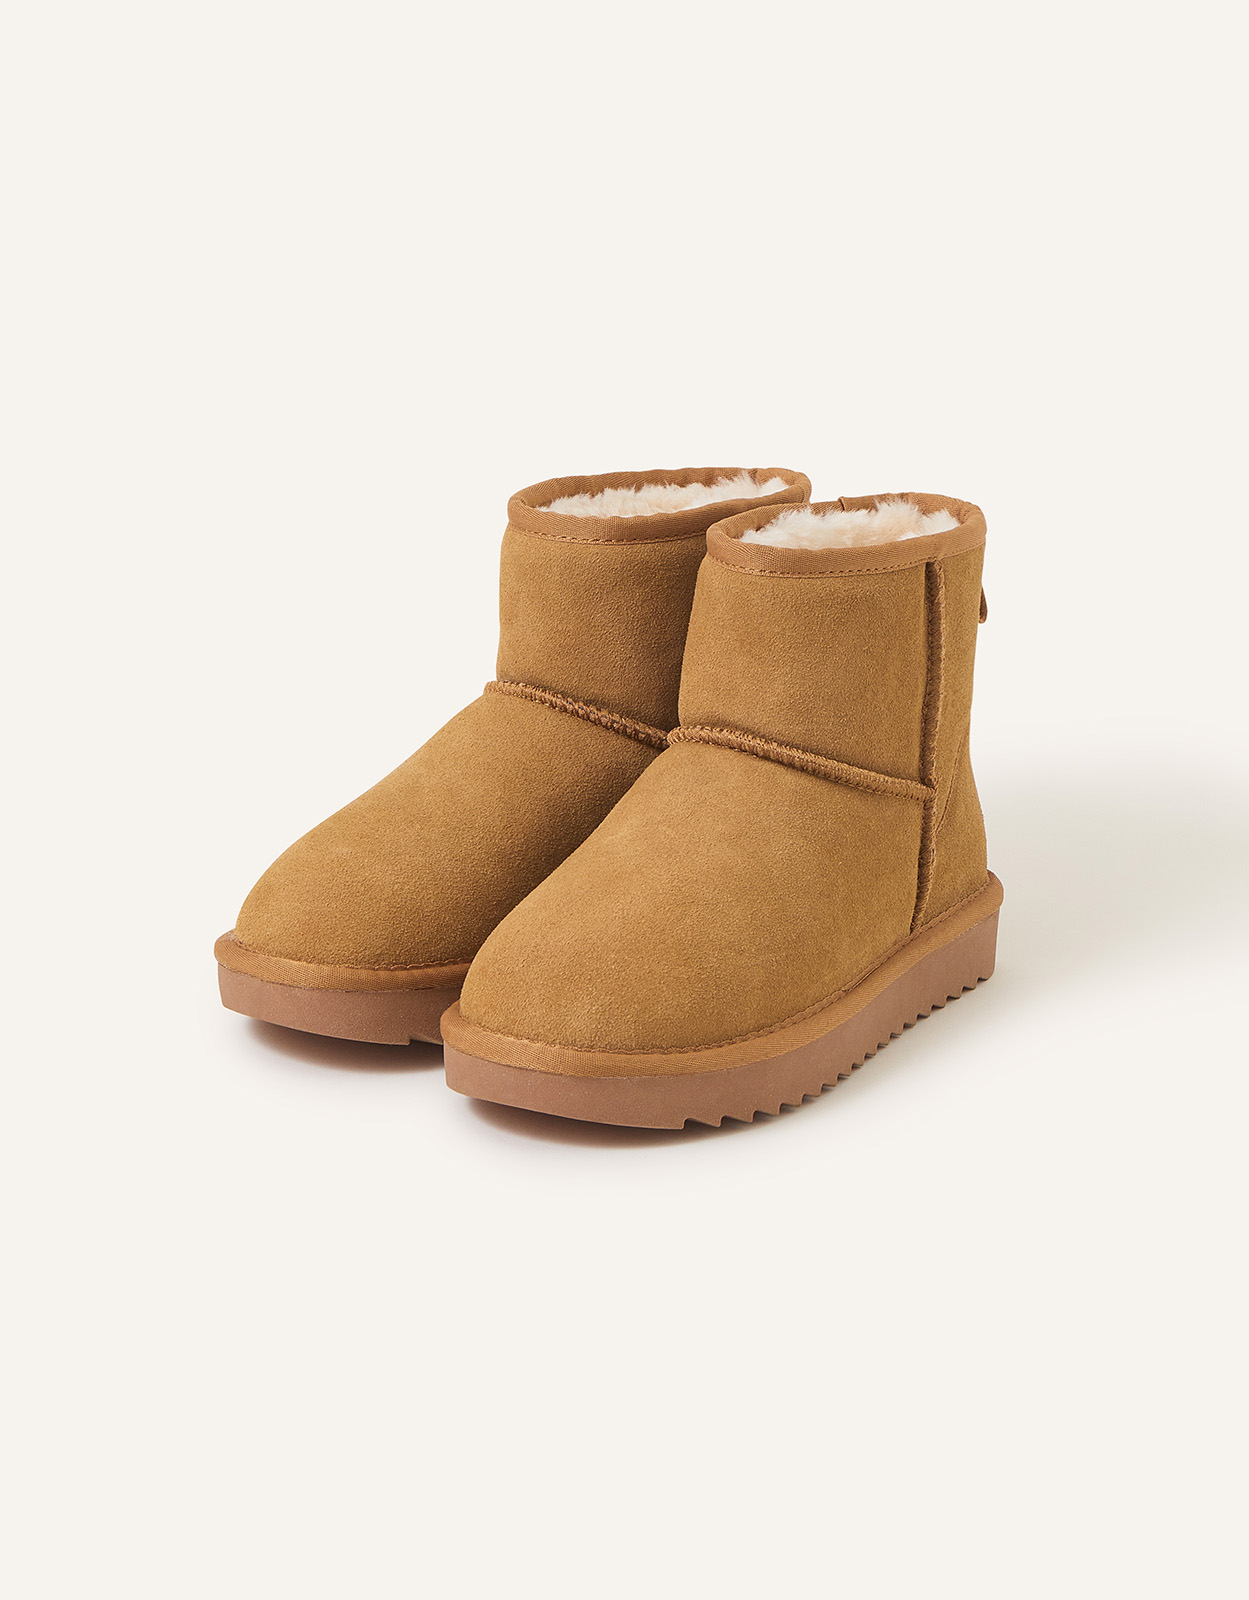 Accessorize Mid Suede Boots Tan, Size: 36